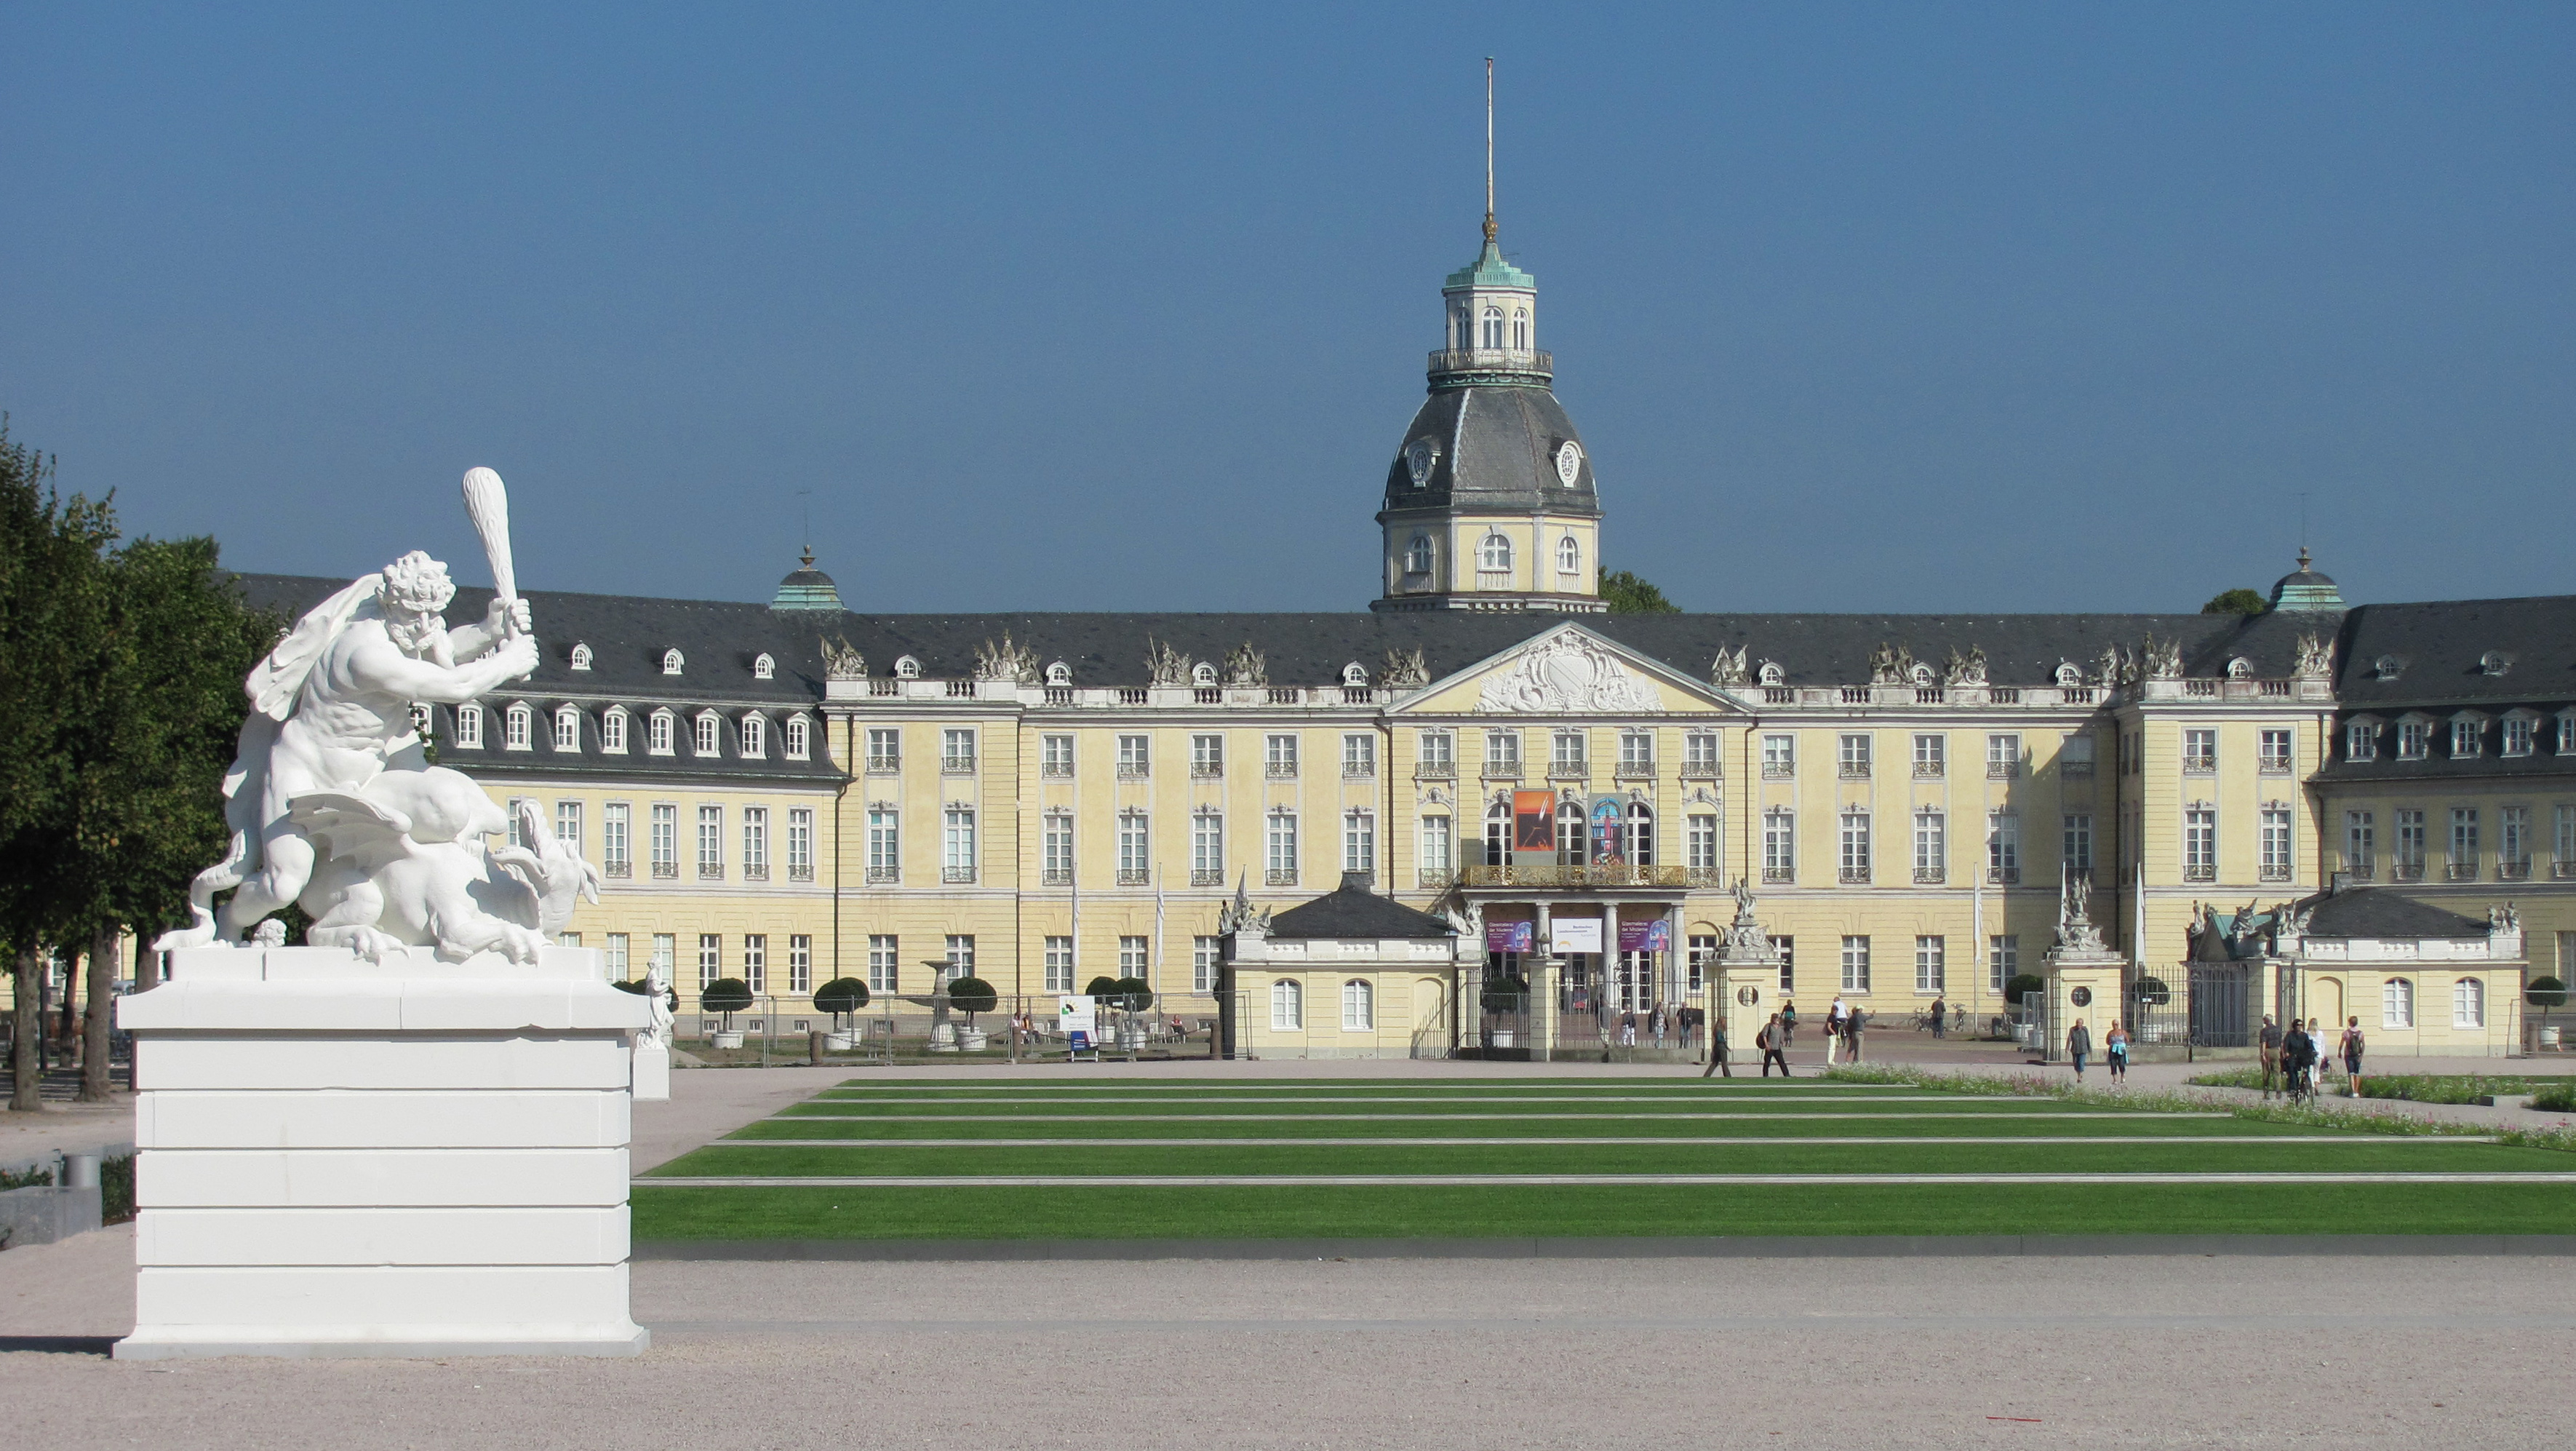 "Schloss Karlsruhe 2011" by NordNordWest - Own work. Licensed under CC BY-SA 3.0 via Wikimedia Commons - https://commons.wikimedia.org/wiki/File:Schloss_Karlsruhe_2011.jpg#/media/File:Schloss_Karlsruhe_2011.jpg